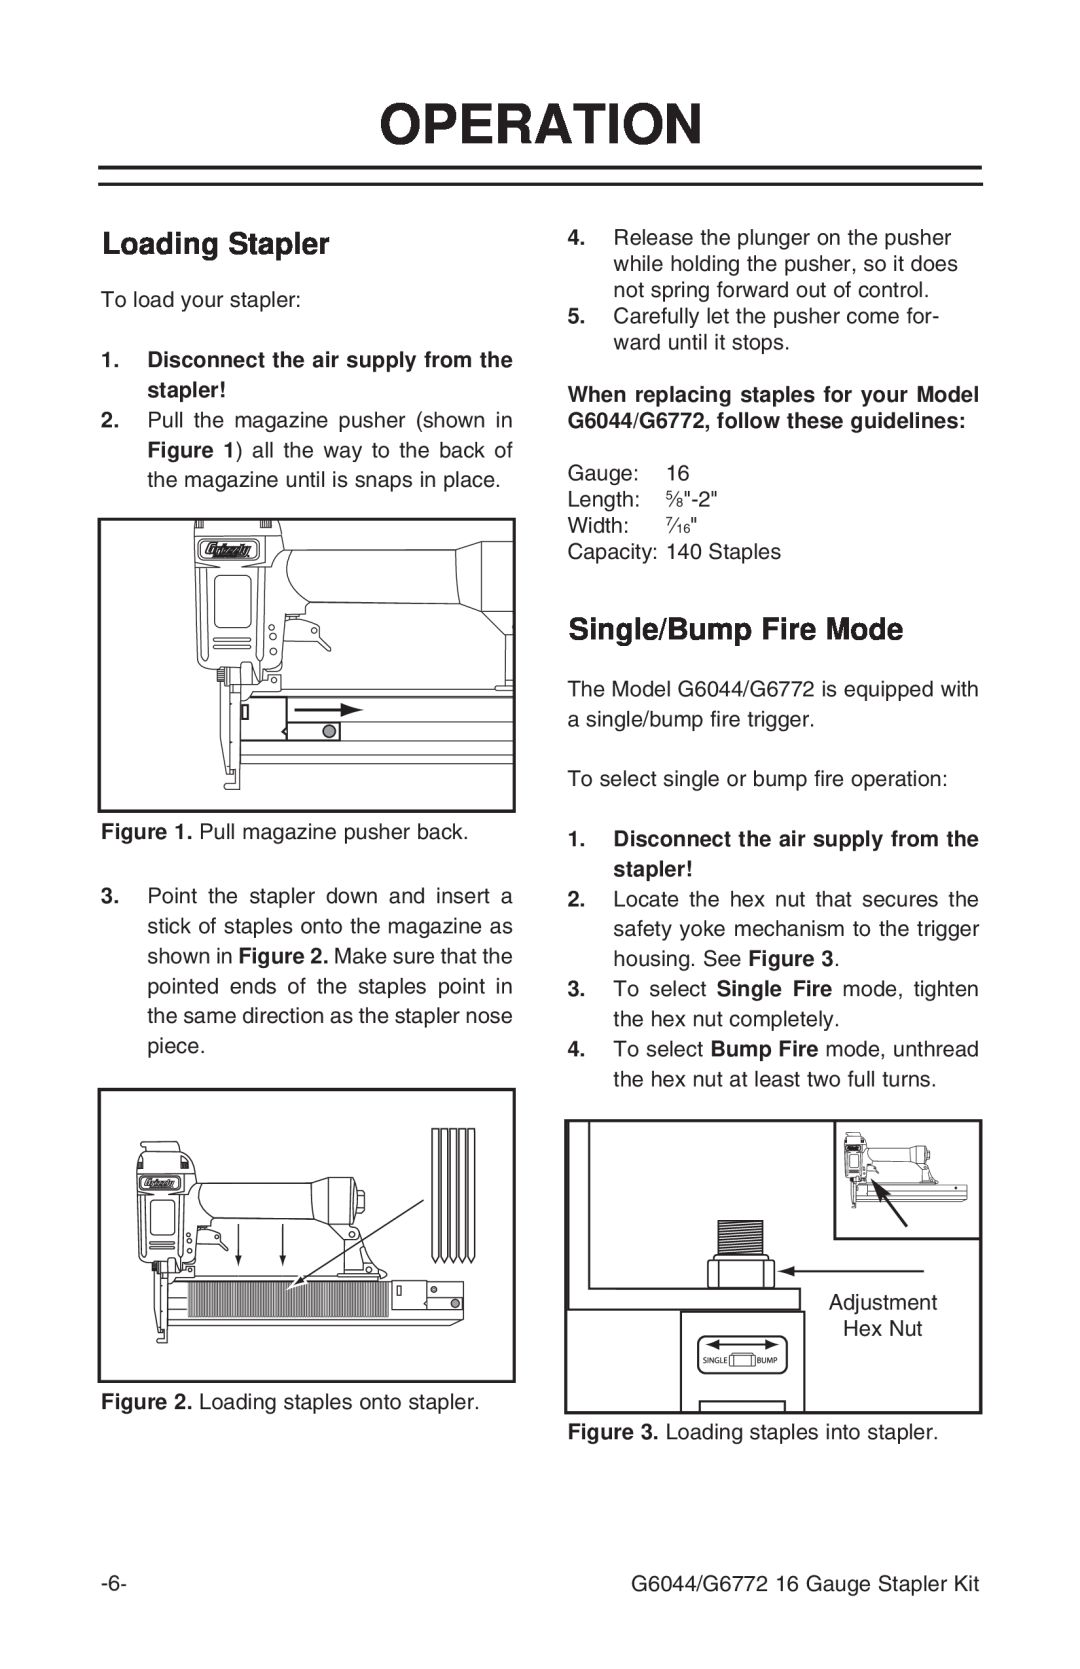 Grizzly G6772 instruction manual Operation, Loading Stapler, Single/Bump Fire Mode 